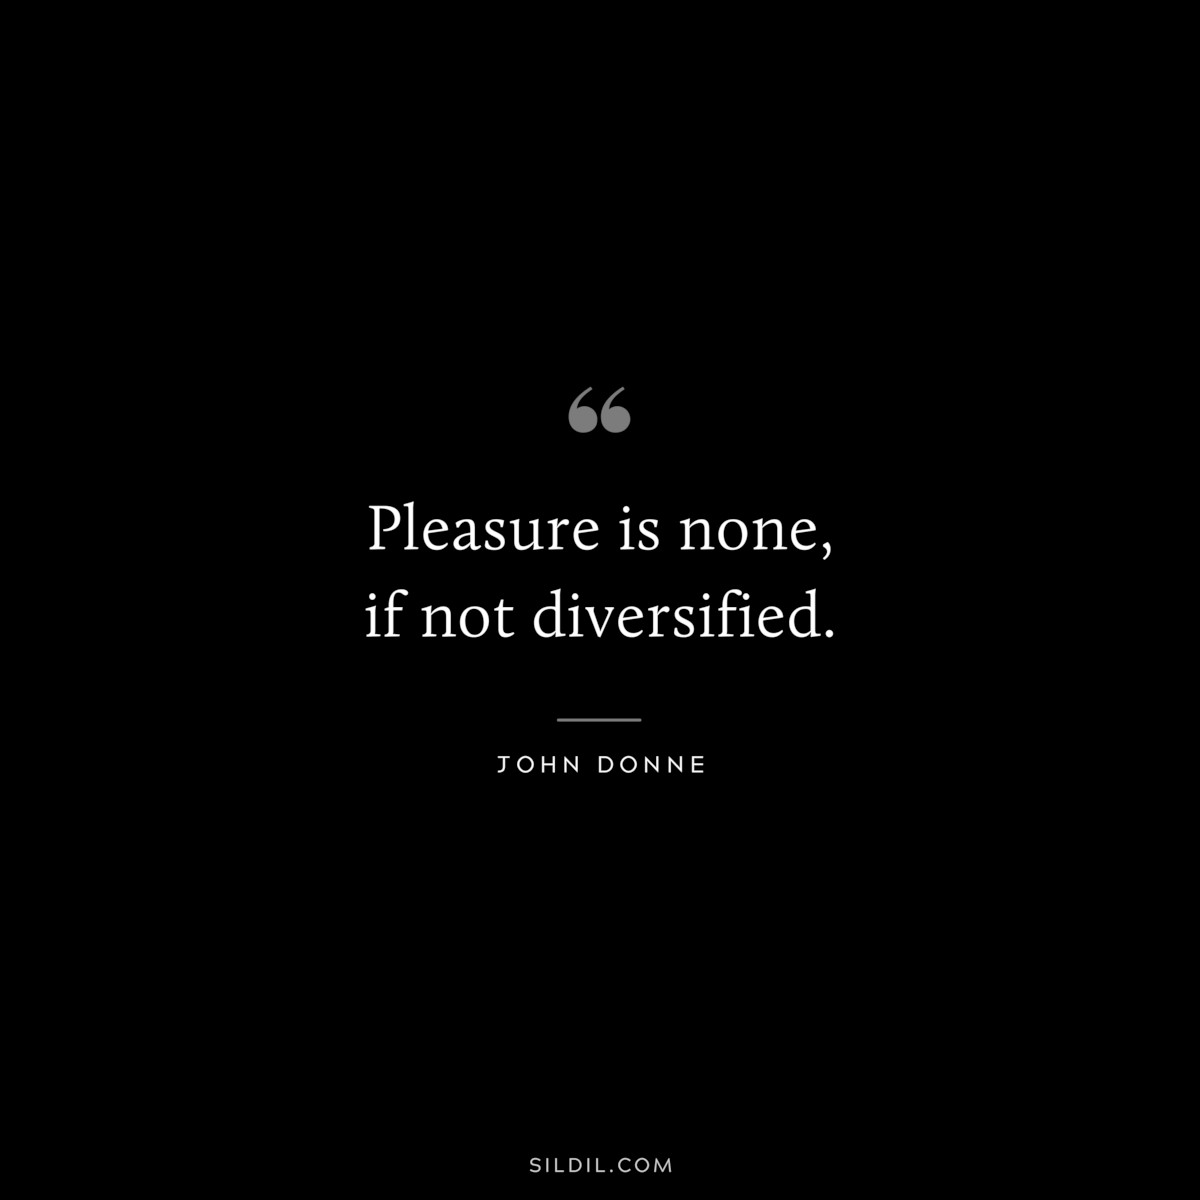 Pleasure is none, if not diversified. ― John Donne